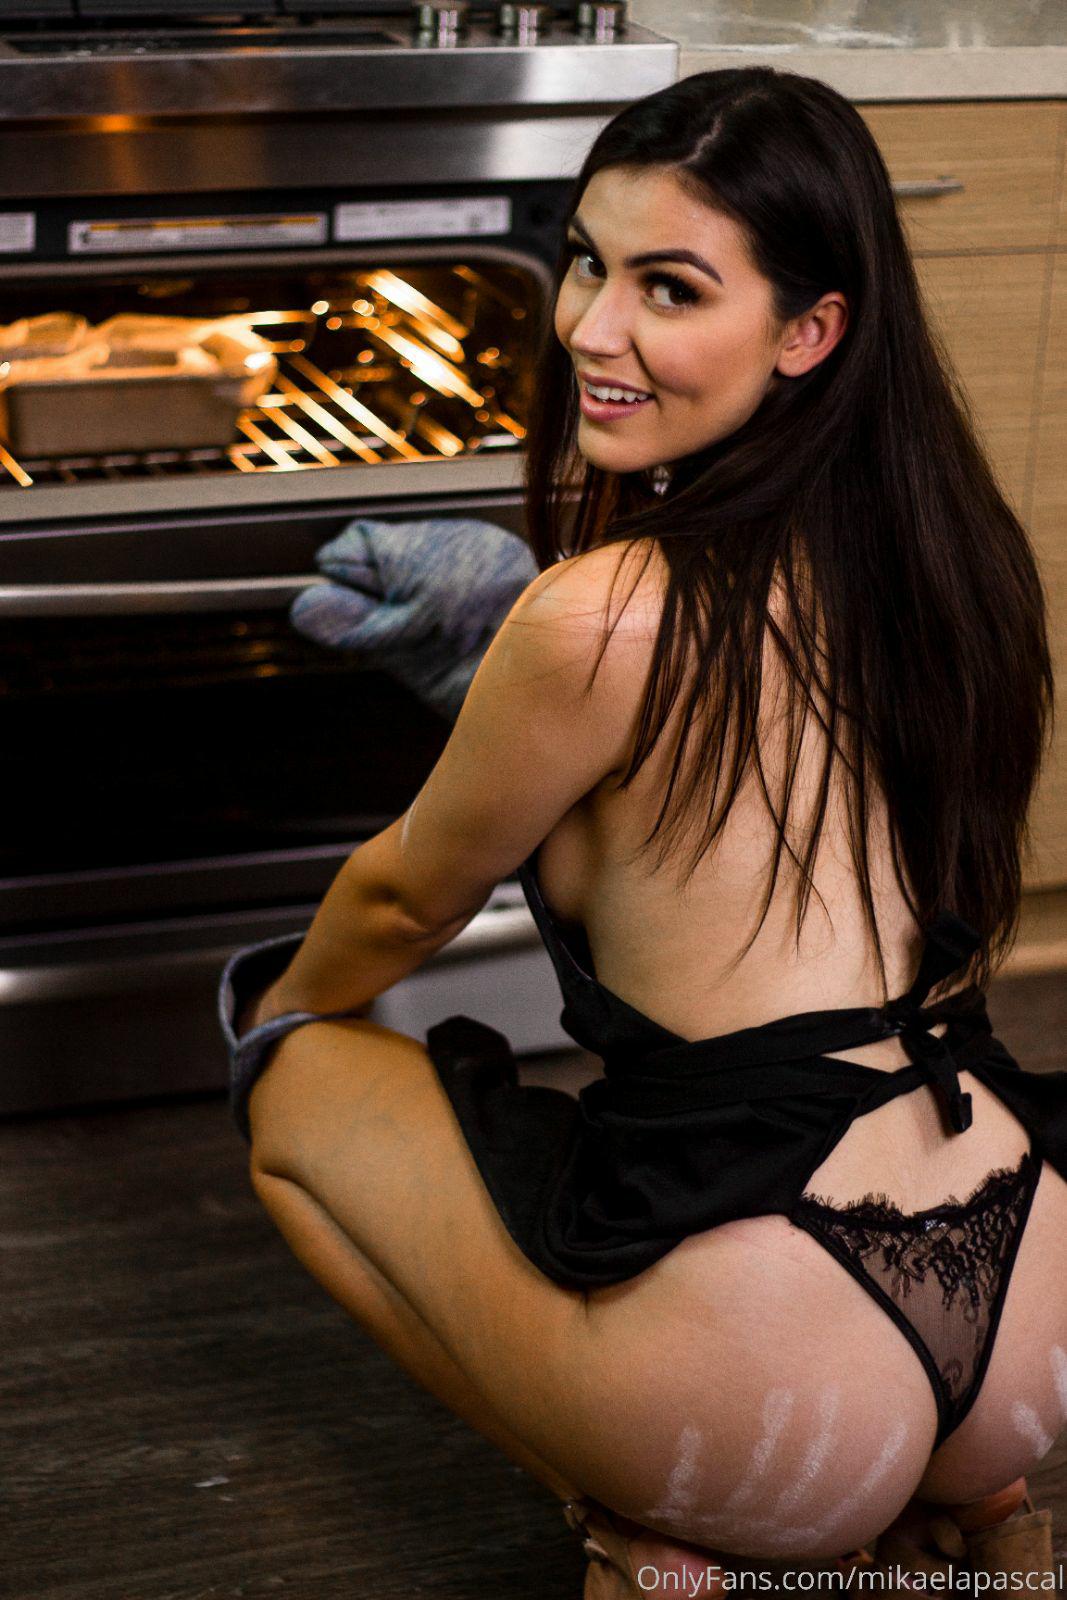 Mikaela Pascal Nude In The Kitchen Onlyfans Set.